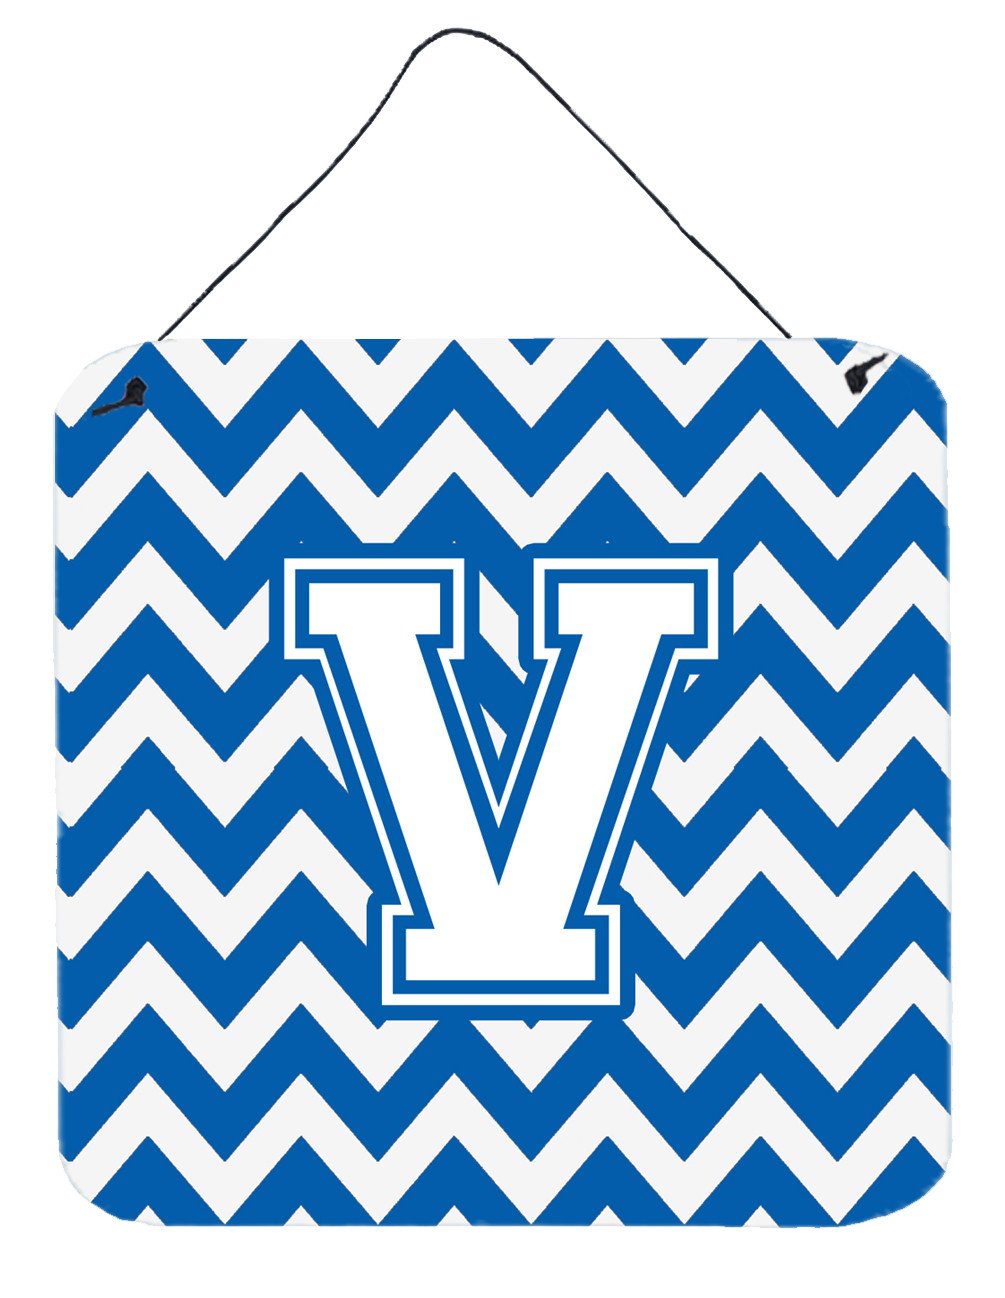 Letter V Chevron Blue and White Wall or Door Hanging Prints CJ1045-VDS66 by Caroline's Treasures